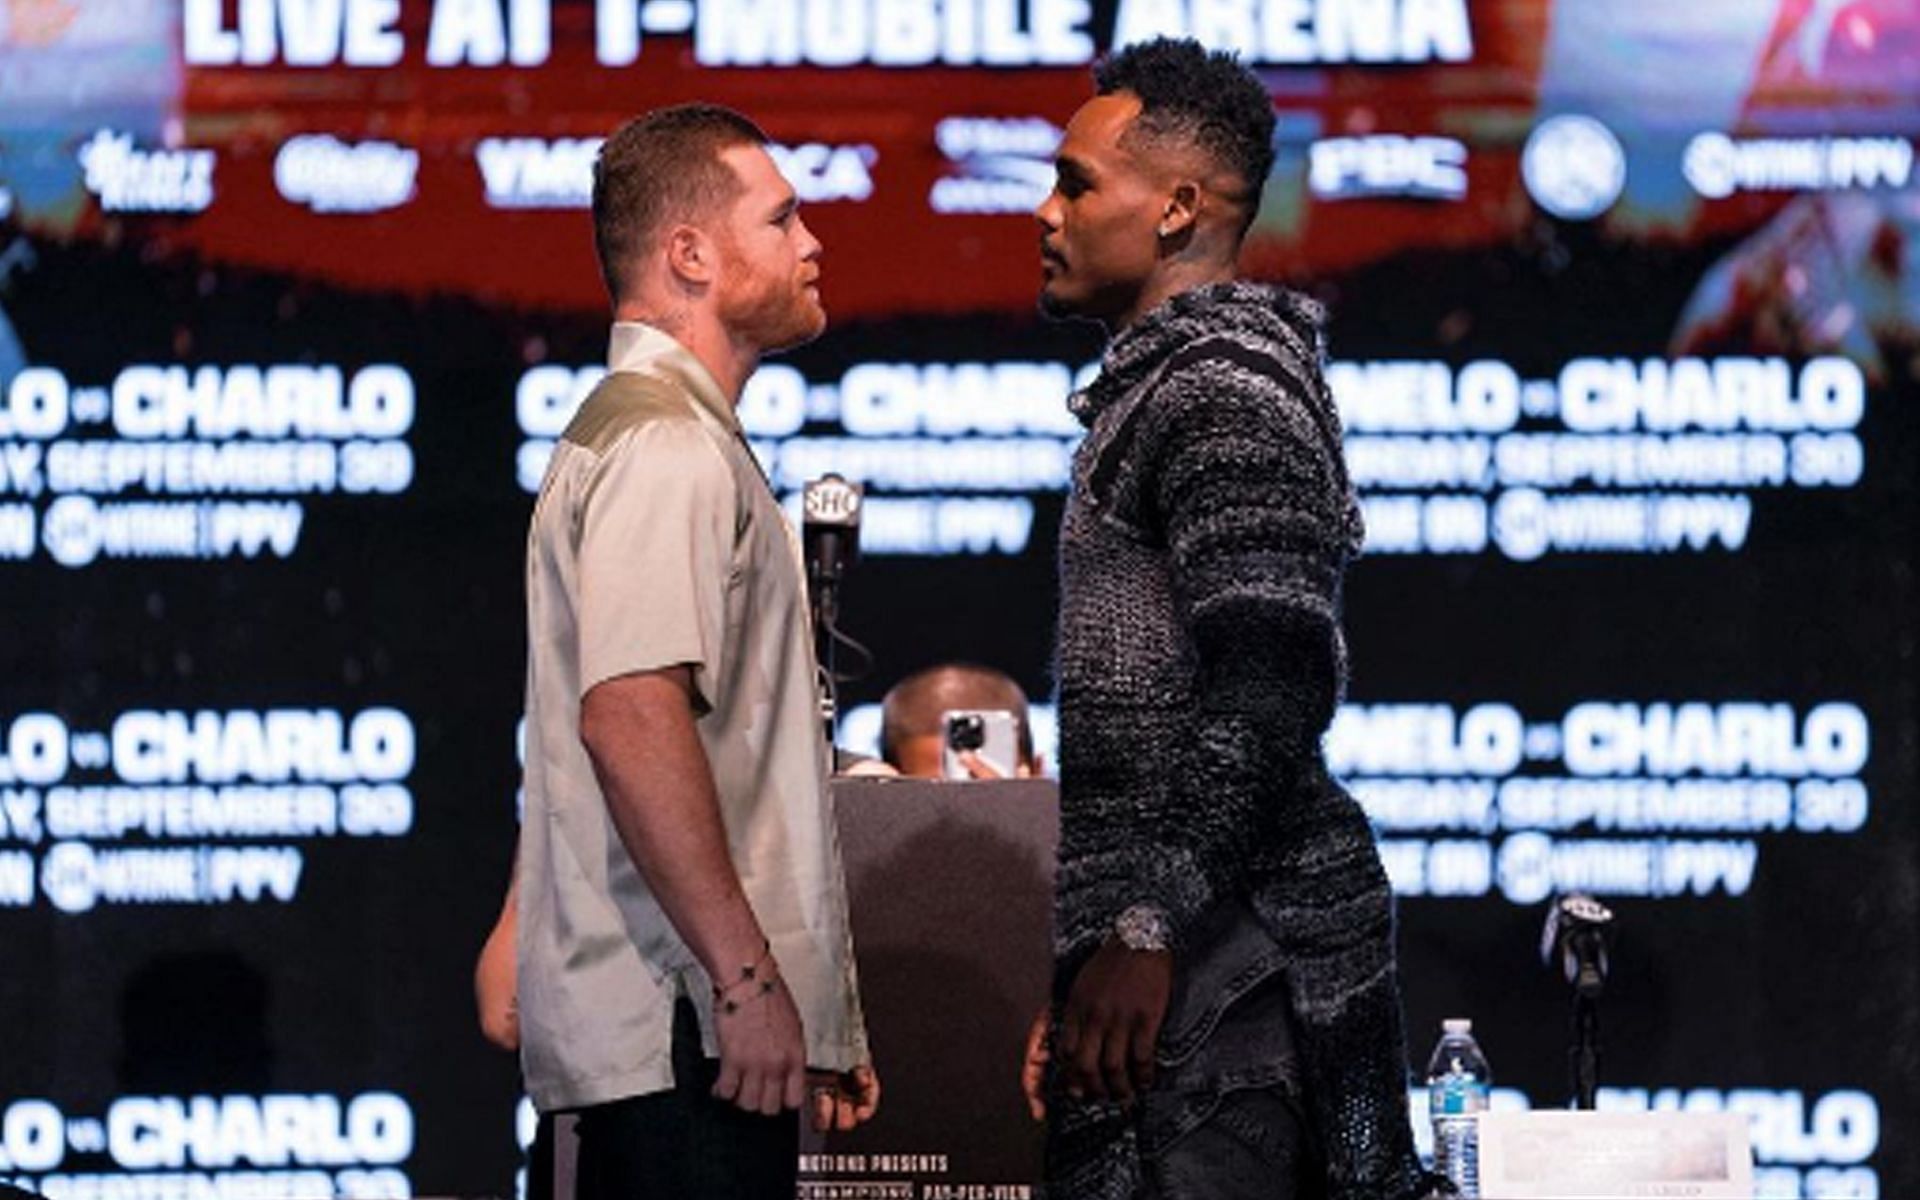 The September 30 event headlined by Canelo Alvarez (left) and Jermell Charlo (right) will be co-promoted  by Canelo promotions (Image via @@canelo Instagram)